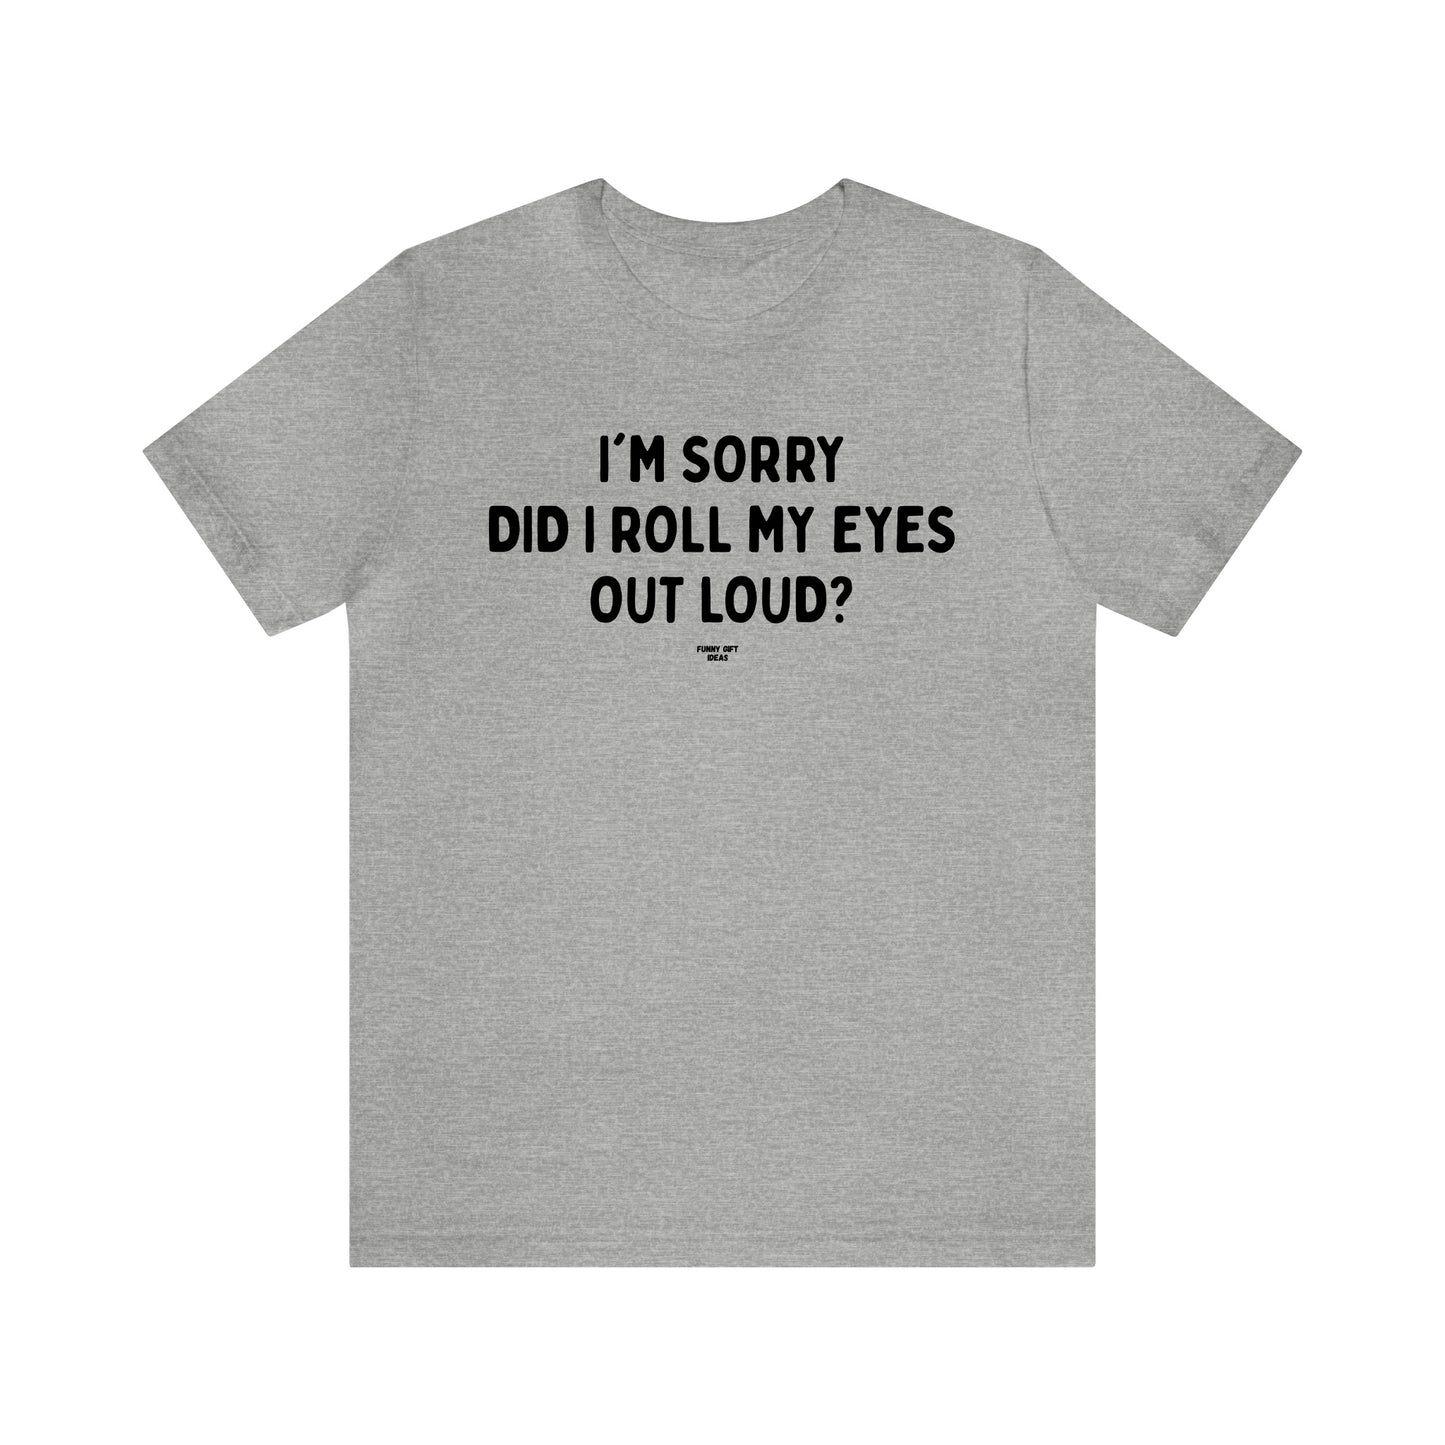 Mens T Shirts - I'm Sorry Did I Roll My Eyes Out Loud? - Funny Men T Shirts